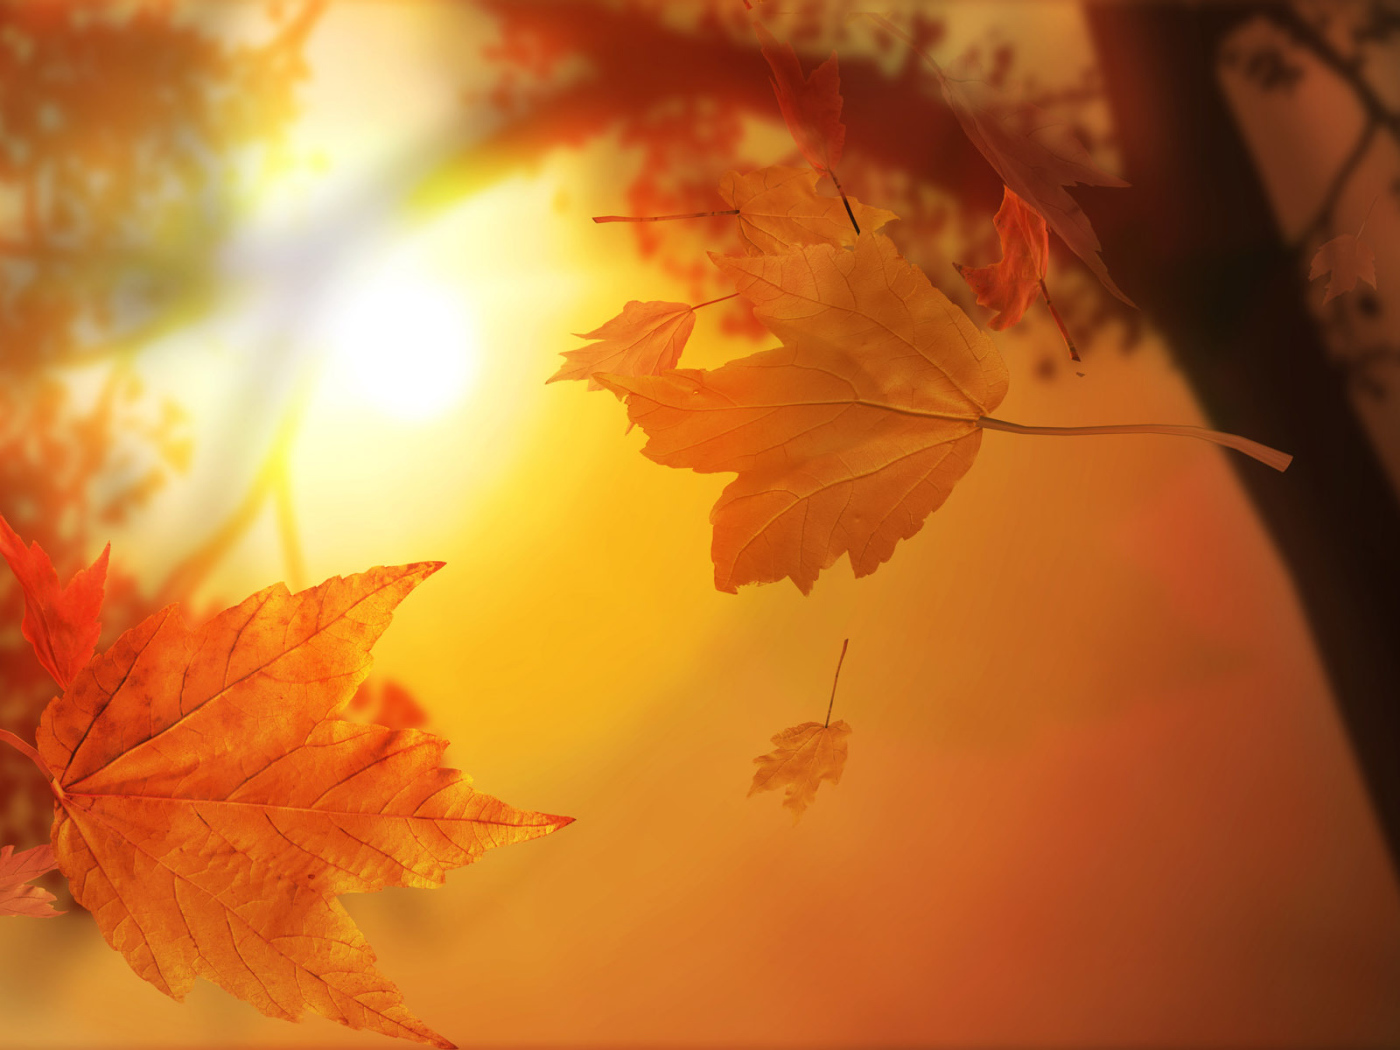 Autumn leaves in the sun